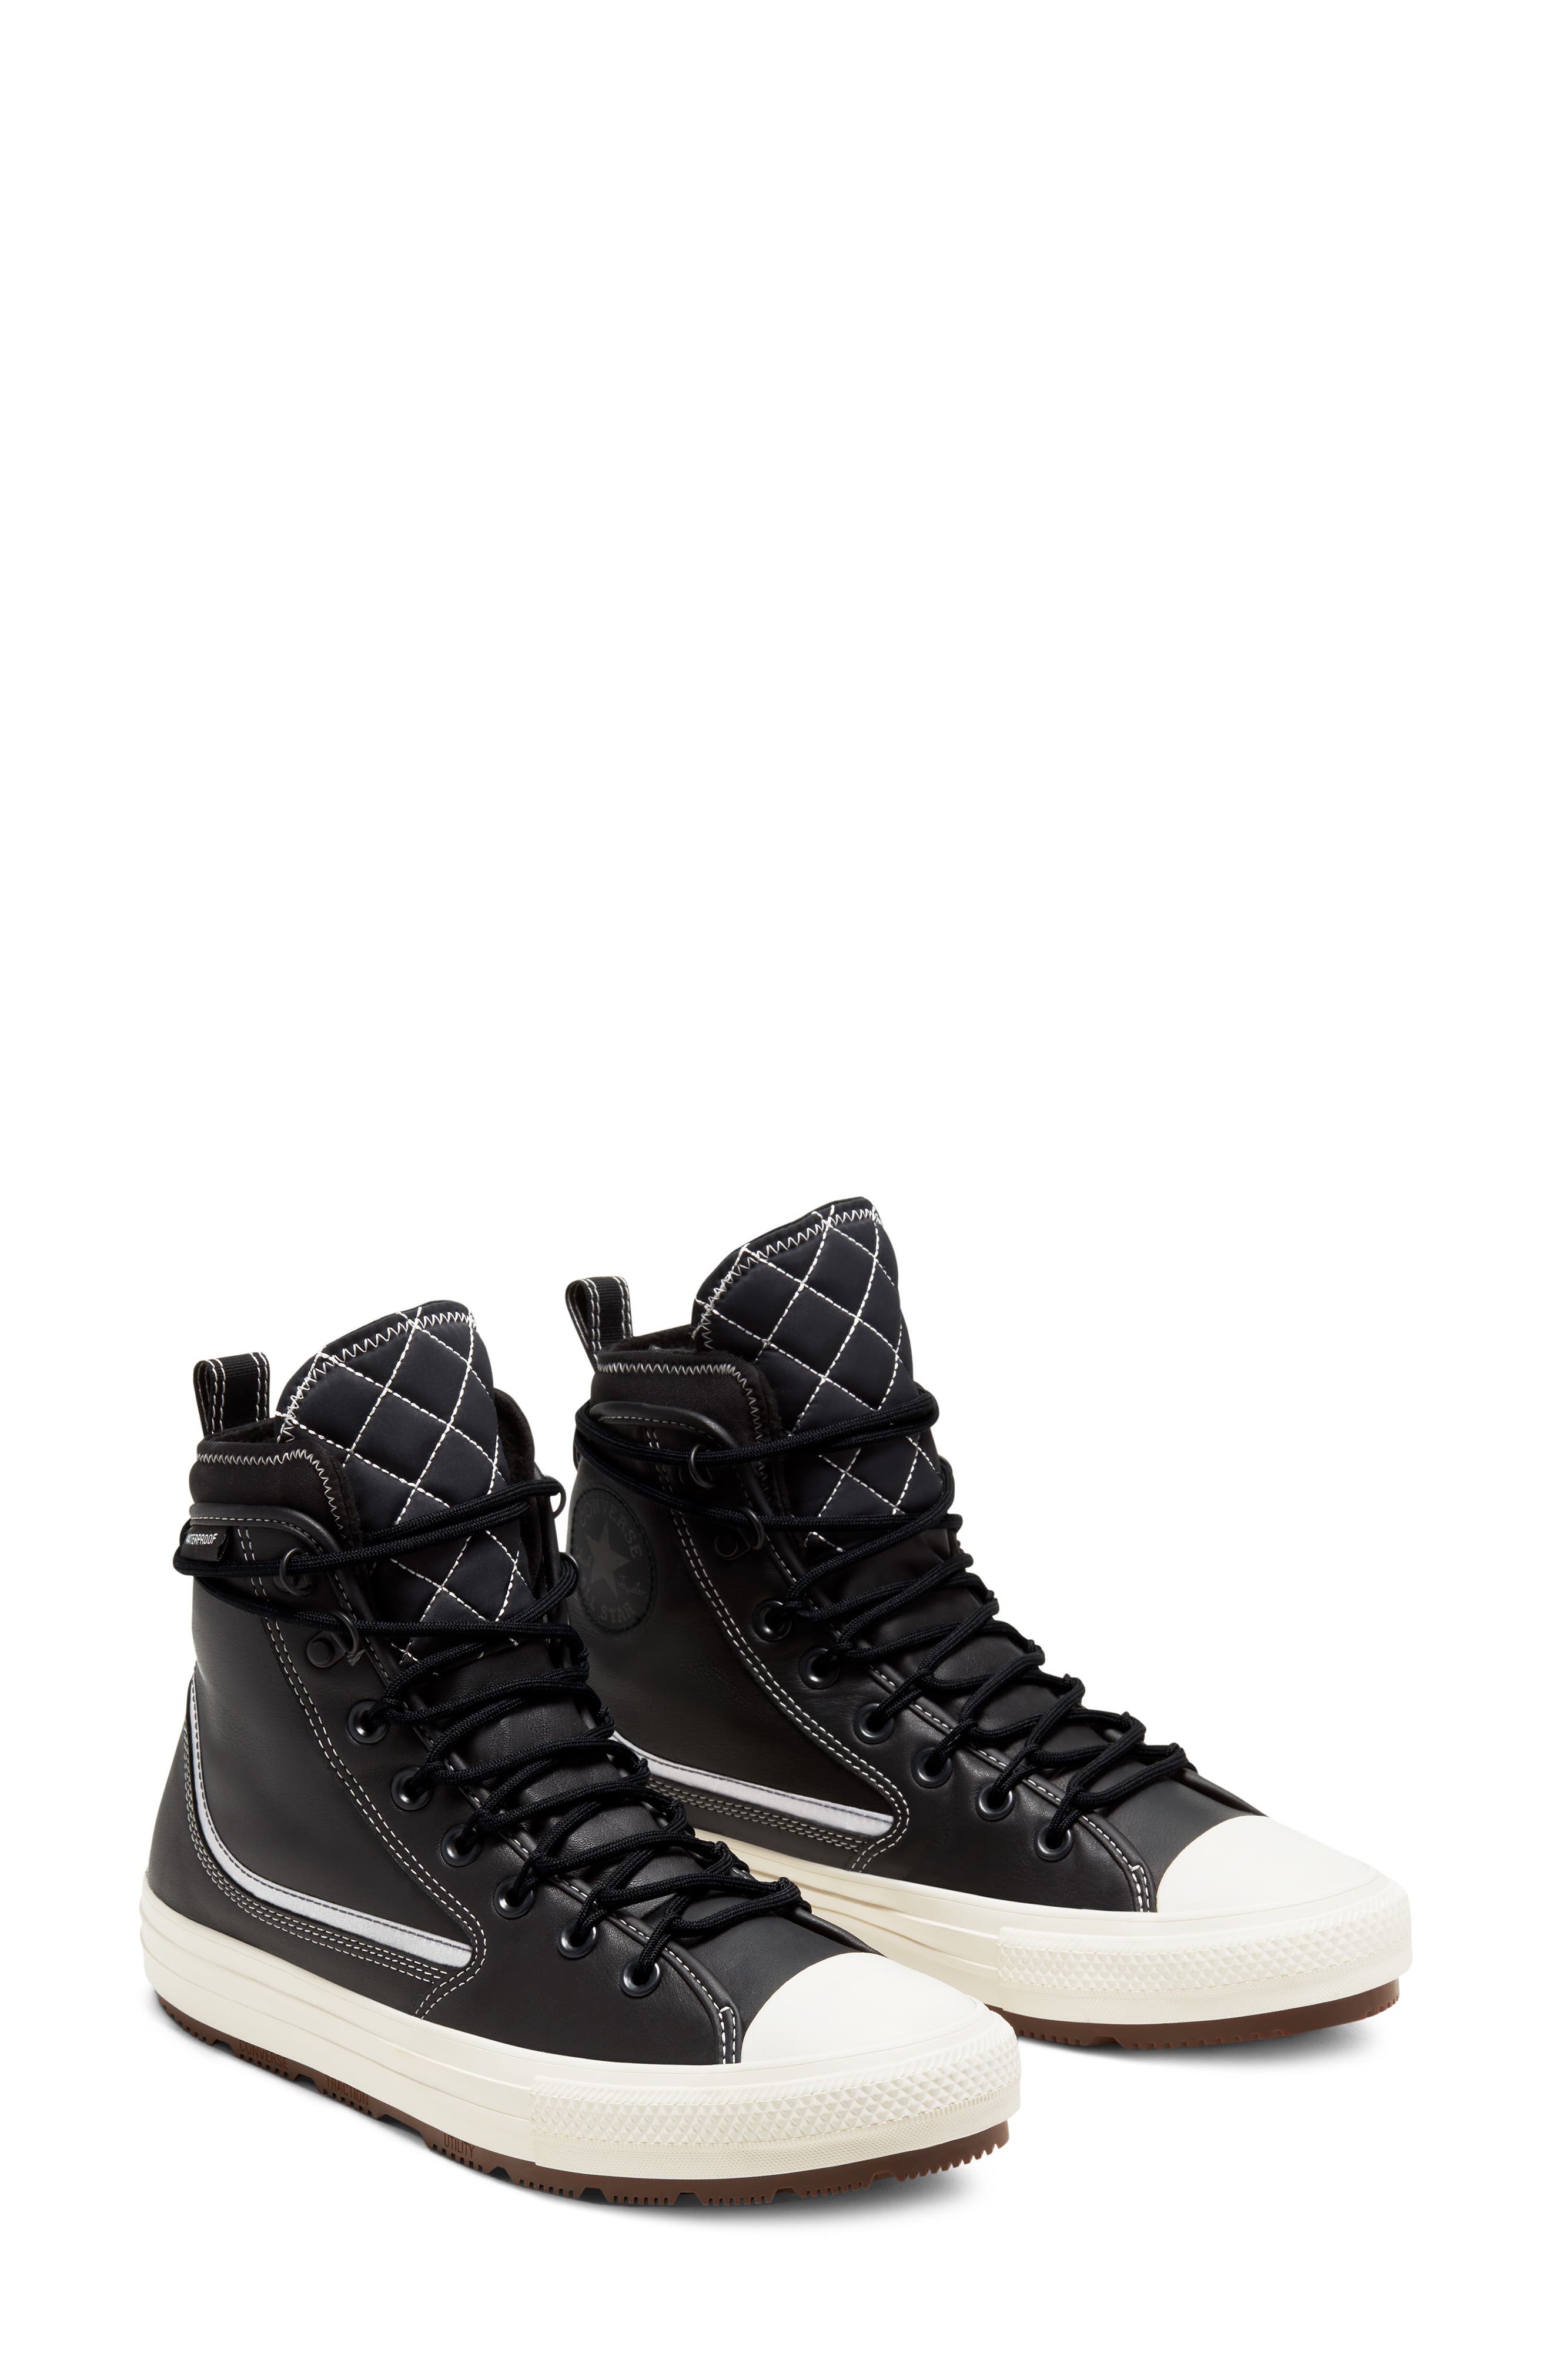 converse all star wp boot